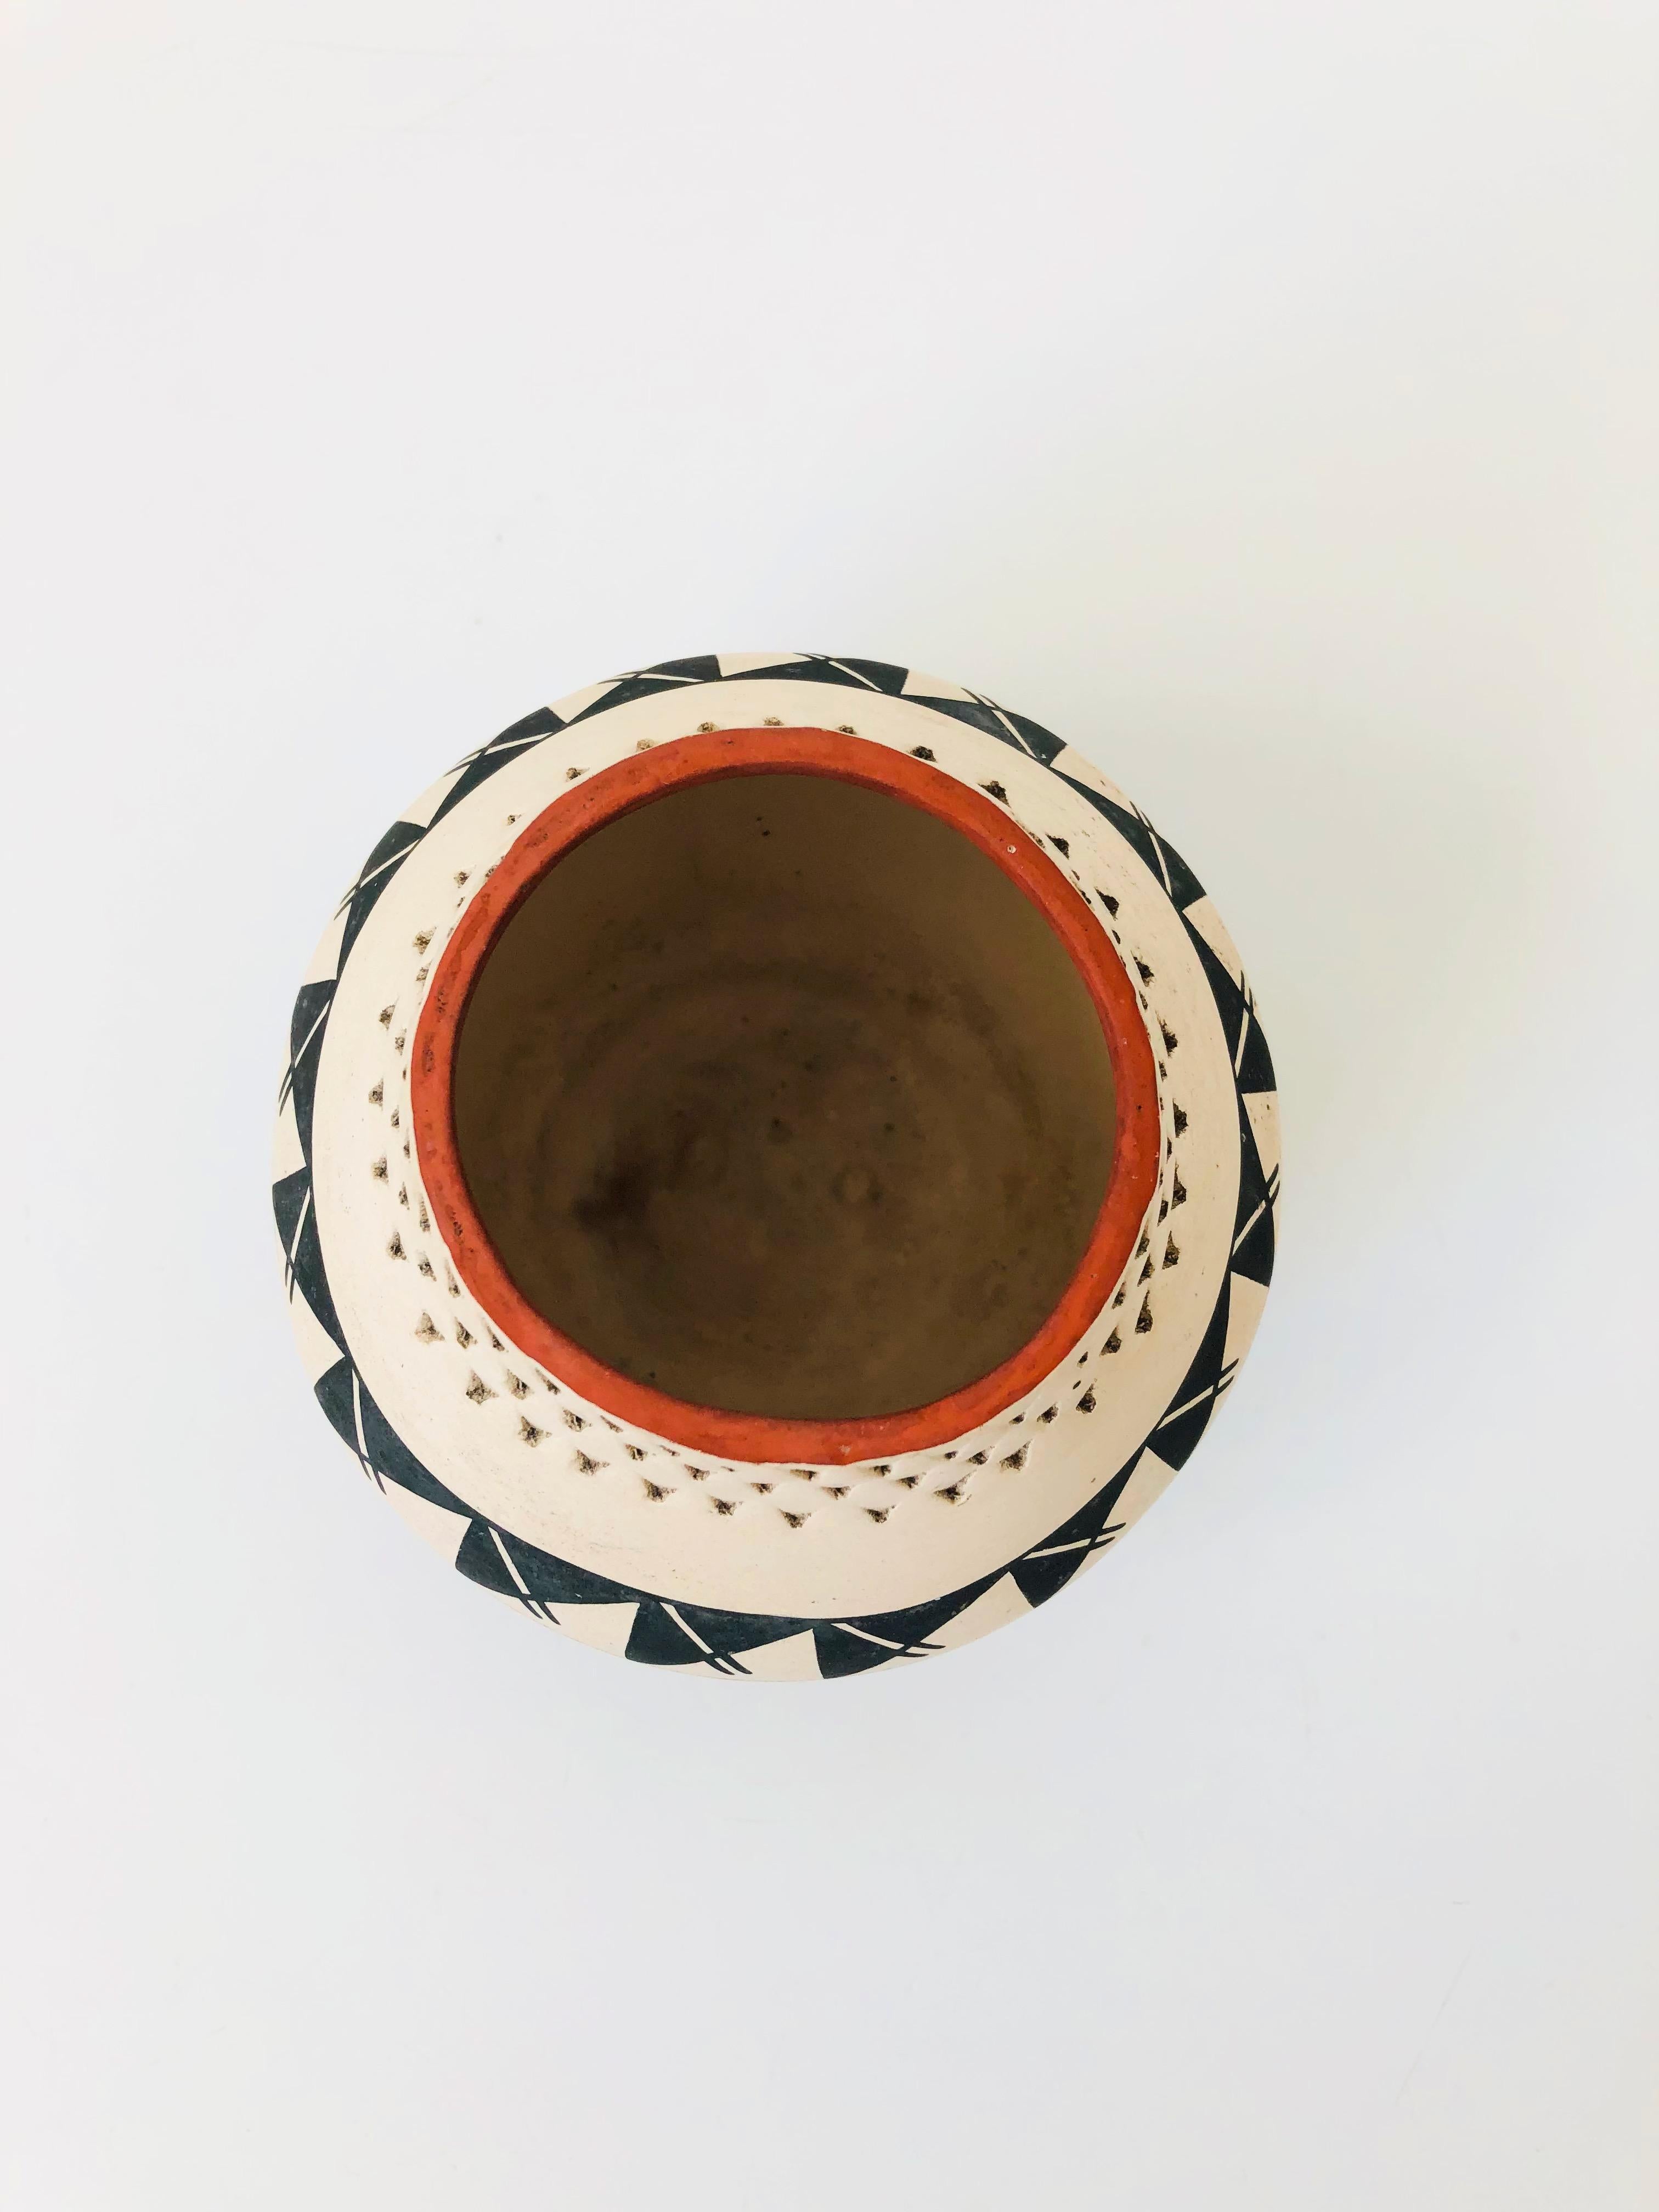 A vintage hand made Acoma pueblo pottery vase with a graphic hand painted design in black and terra cotta on an off-white background. A perforated texture to the neck of the vase adds interest. Signed on the base by R Juanico.
 